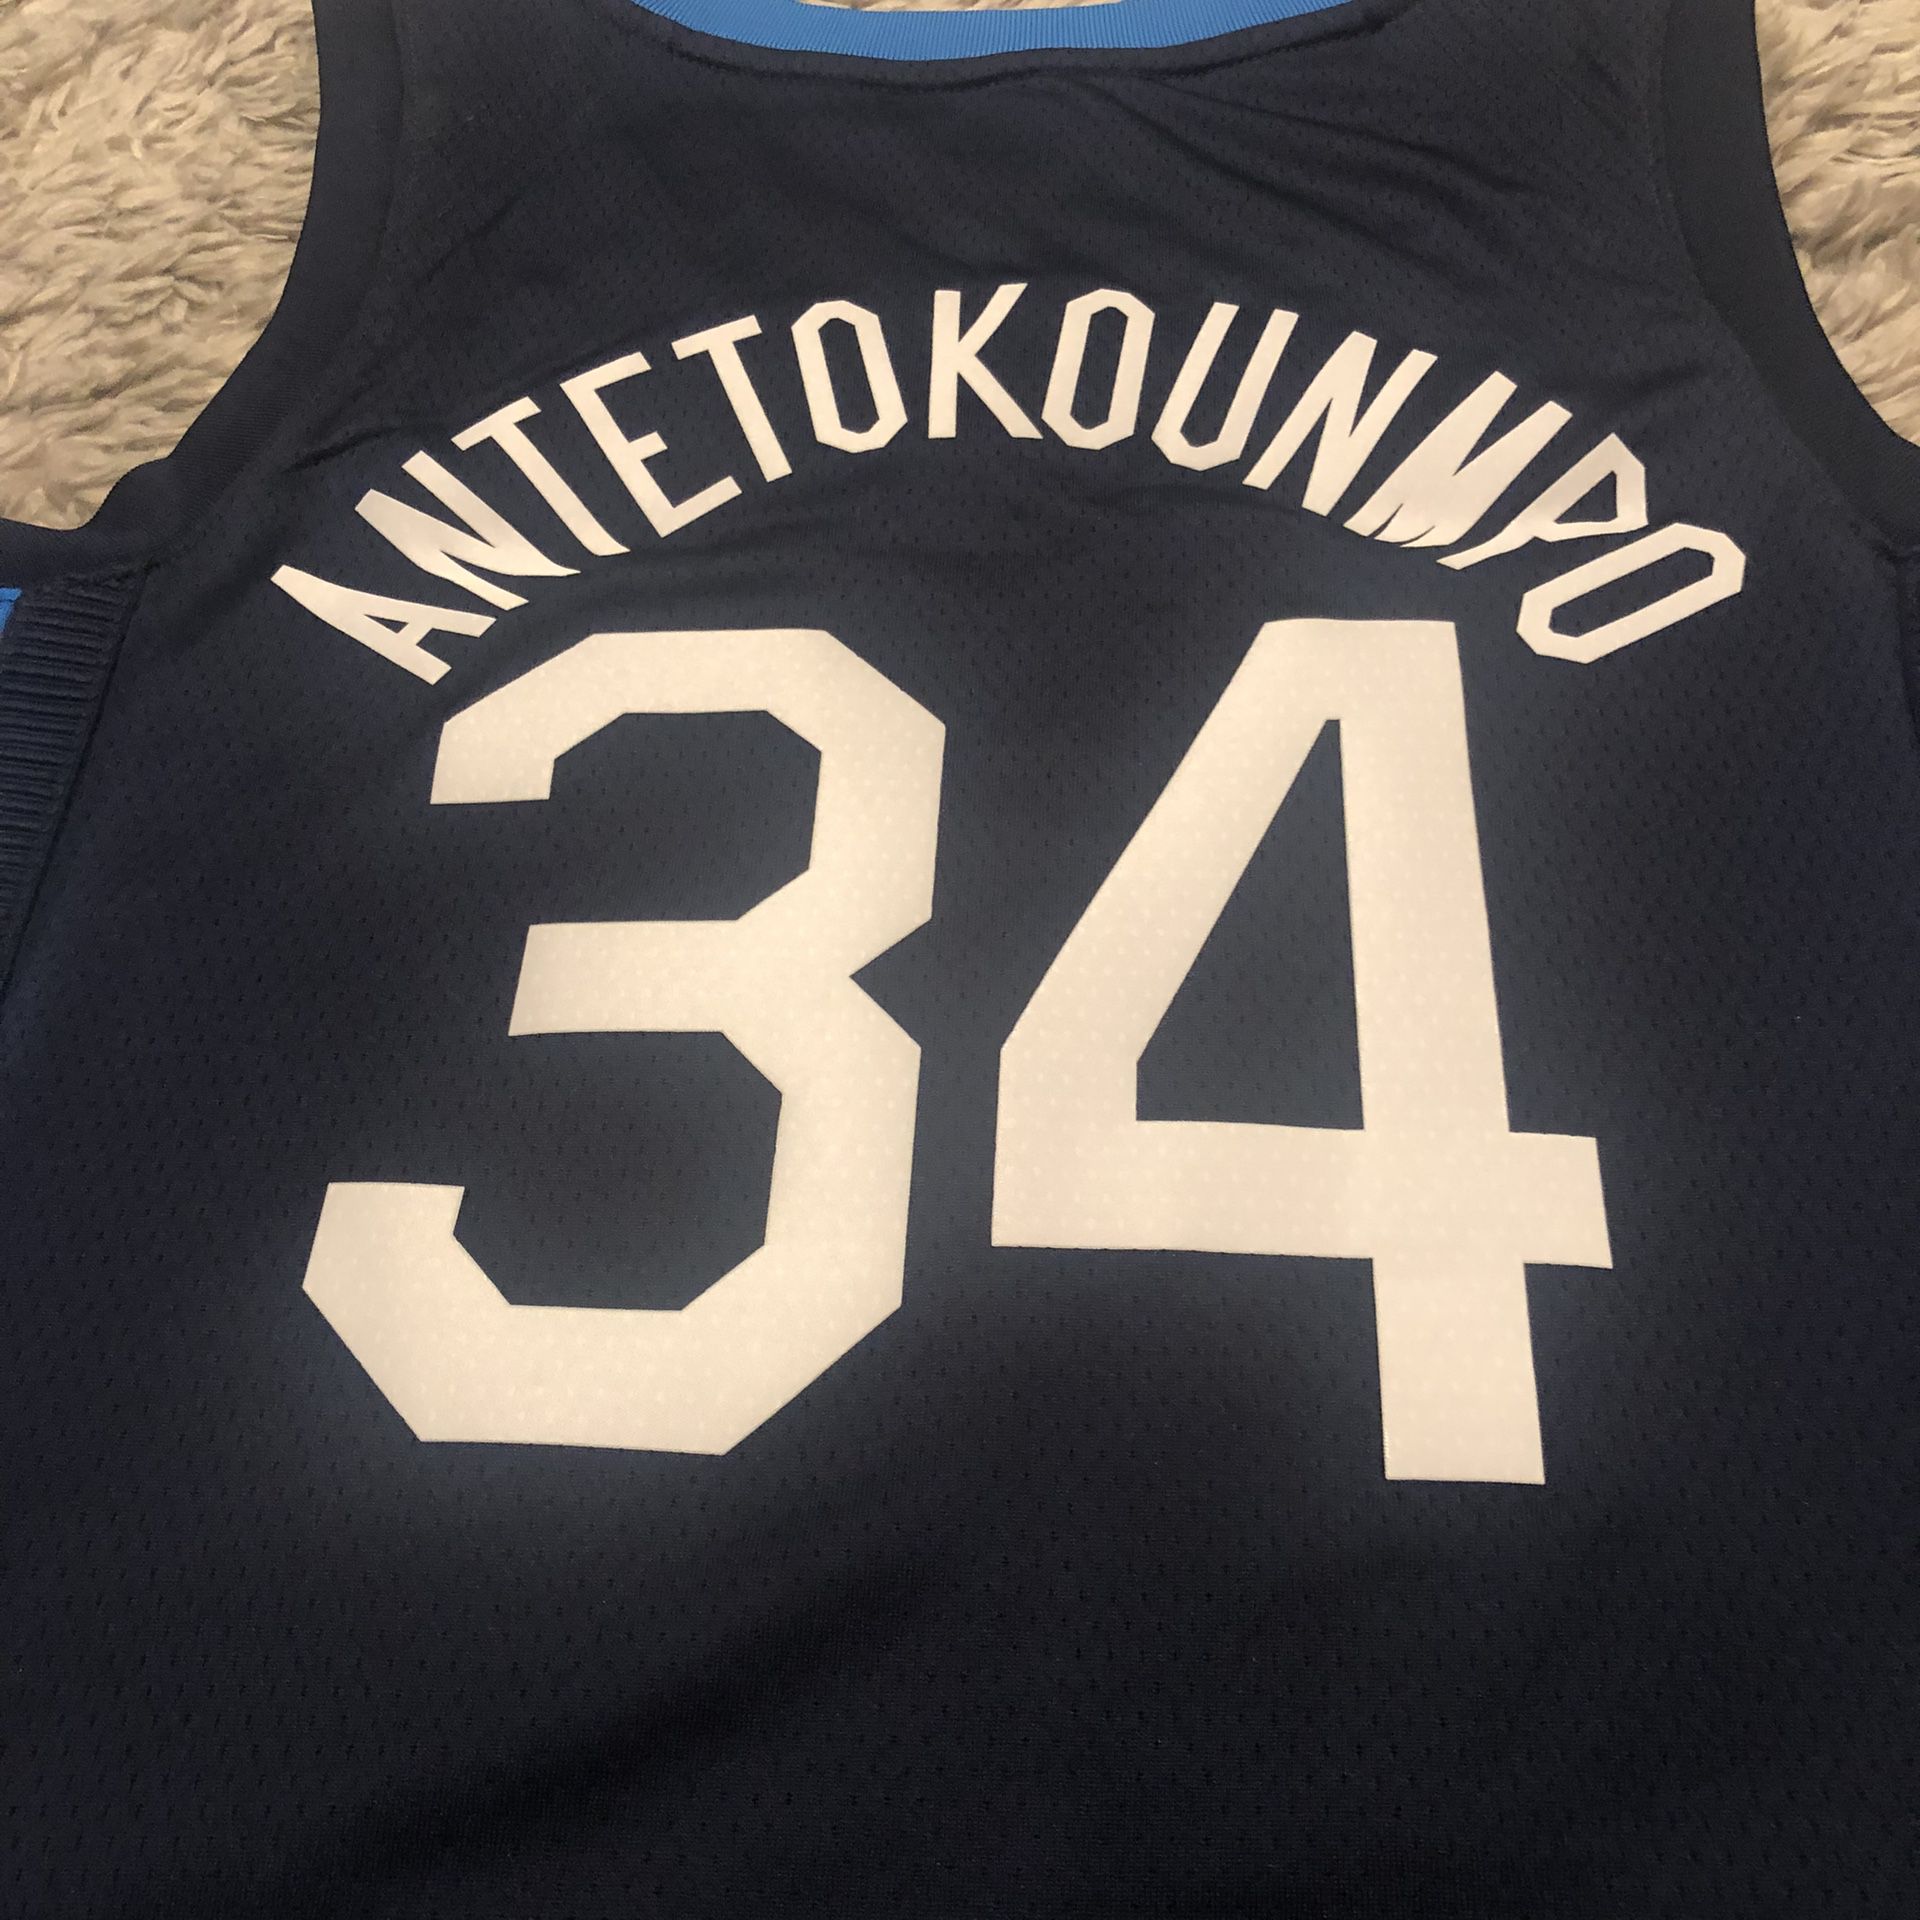 Gianni's Antetokounmpo Jersey for Sale in Oxnard, CA - OfferUp